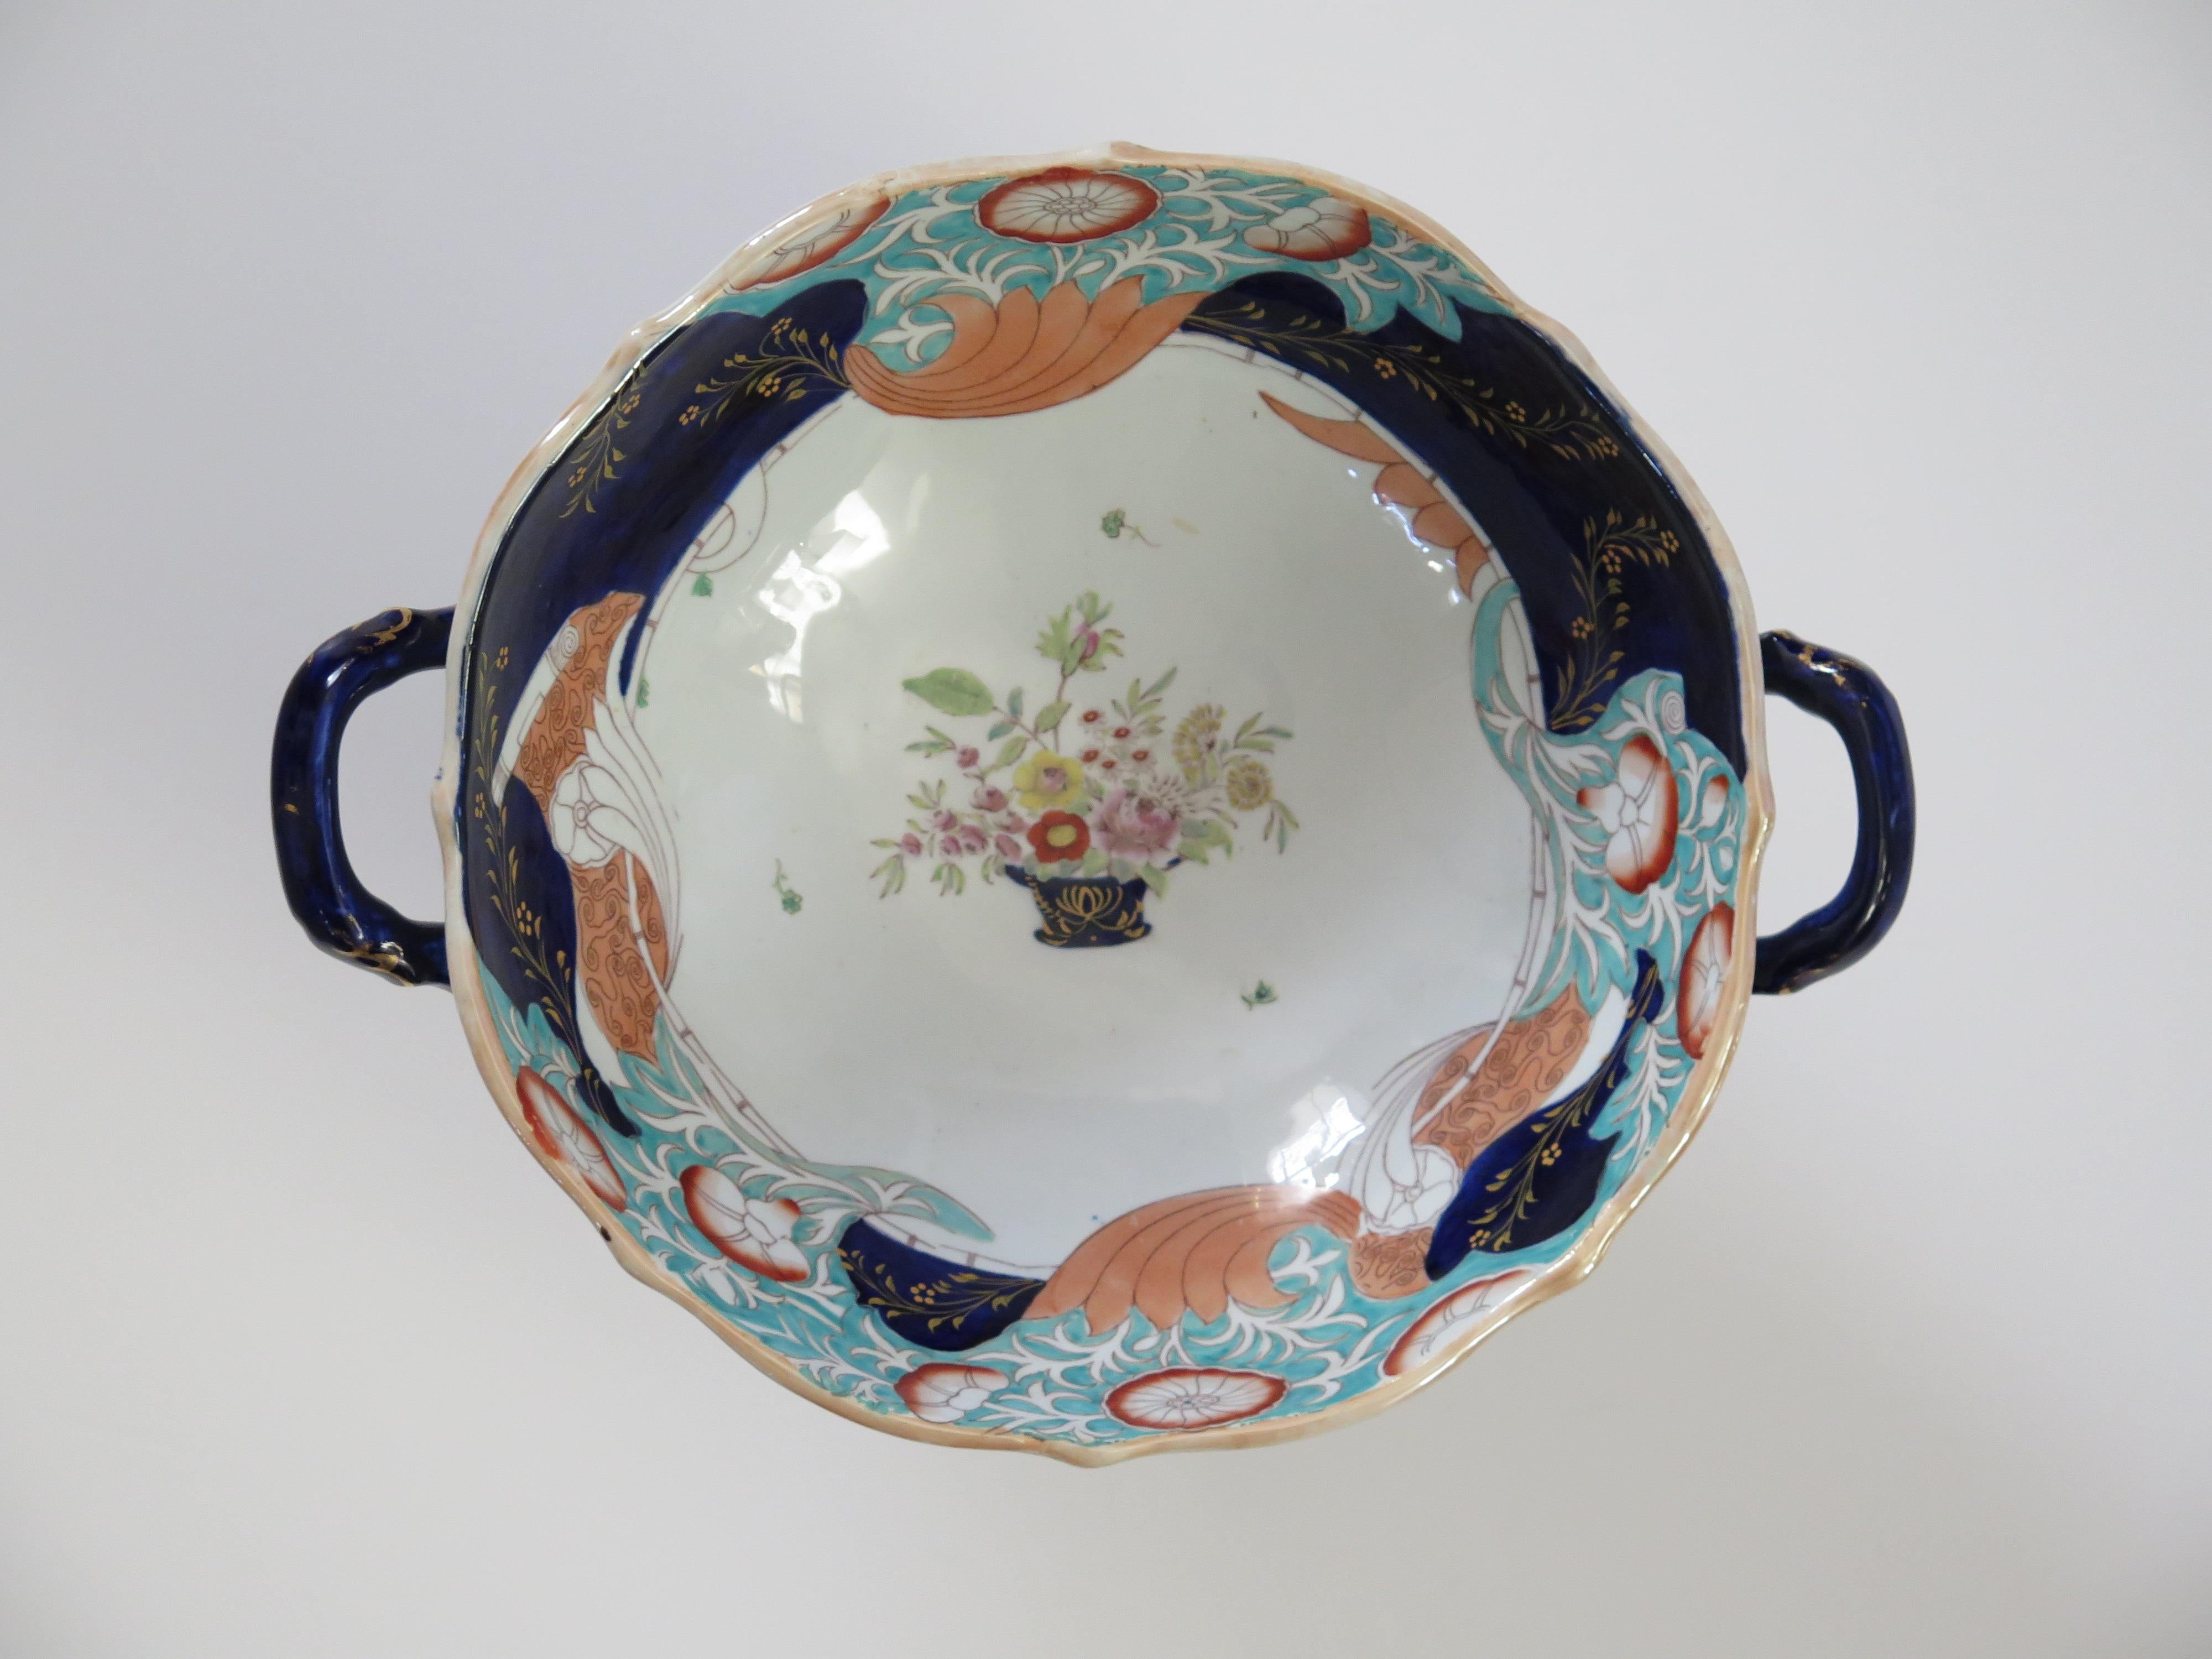 Large Masons Ironstone Punch Bowl in Curled Leaf & Flower Basket ptn, circa 1838 For Sale 2